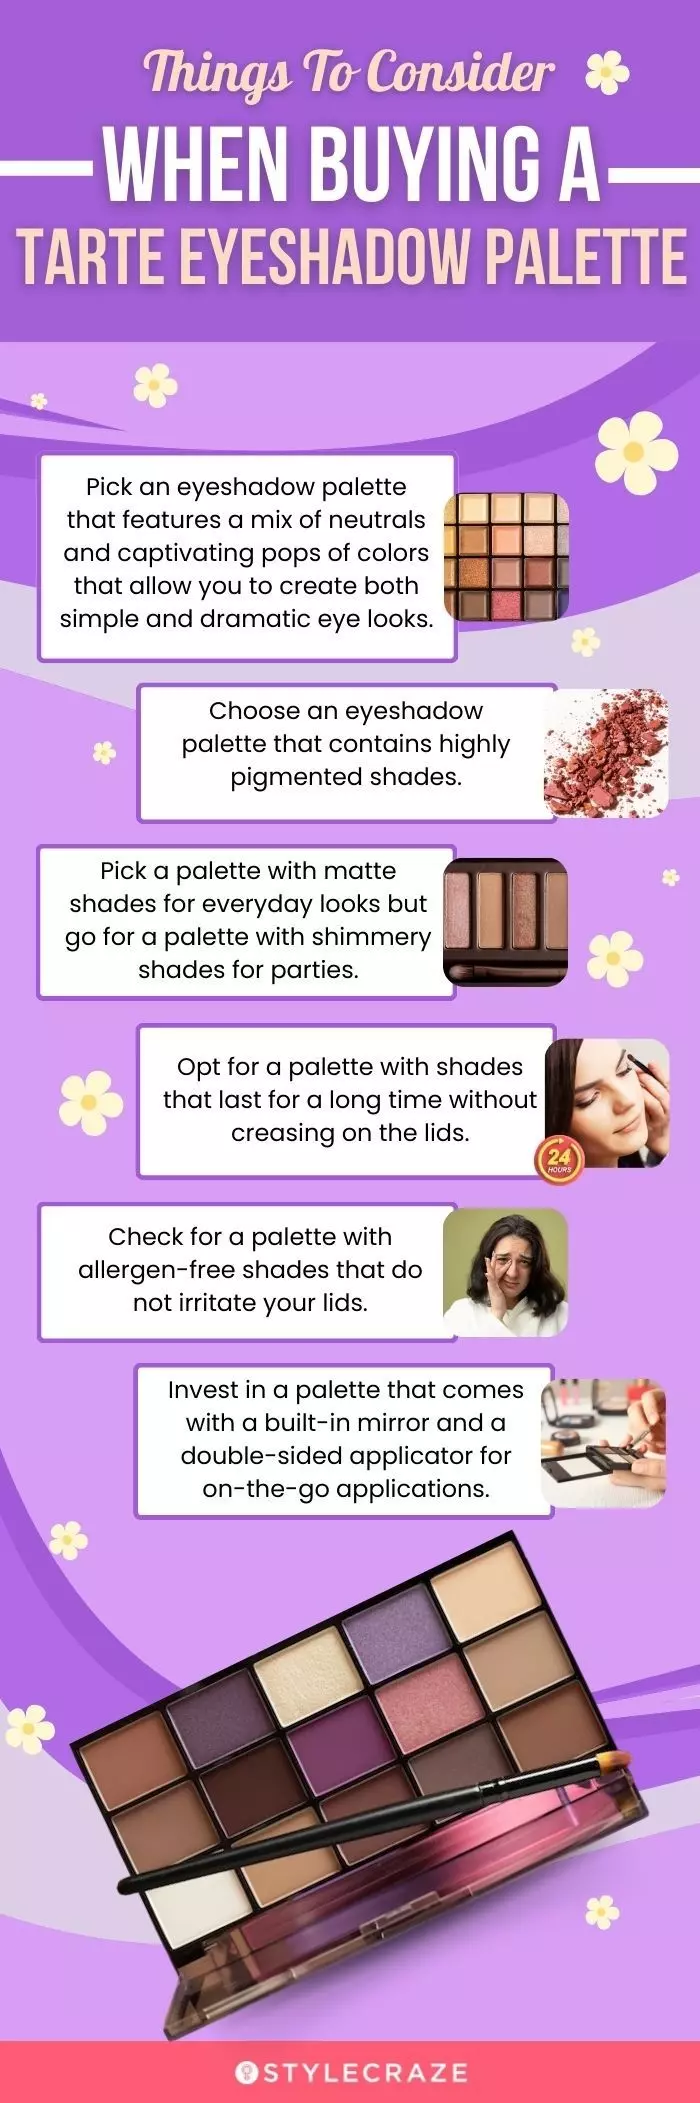 Things To Consider When Buying A Tarte Eyeshadow Palette (infographic)